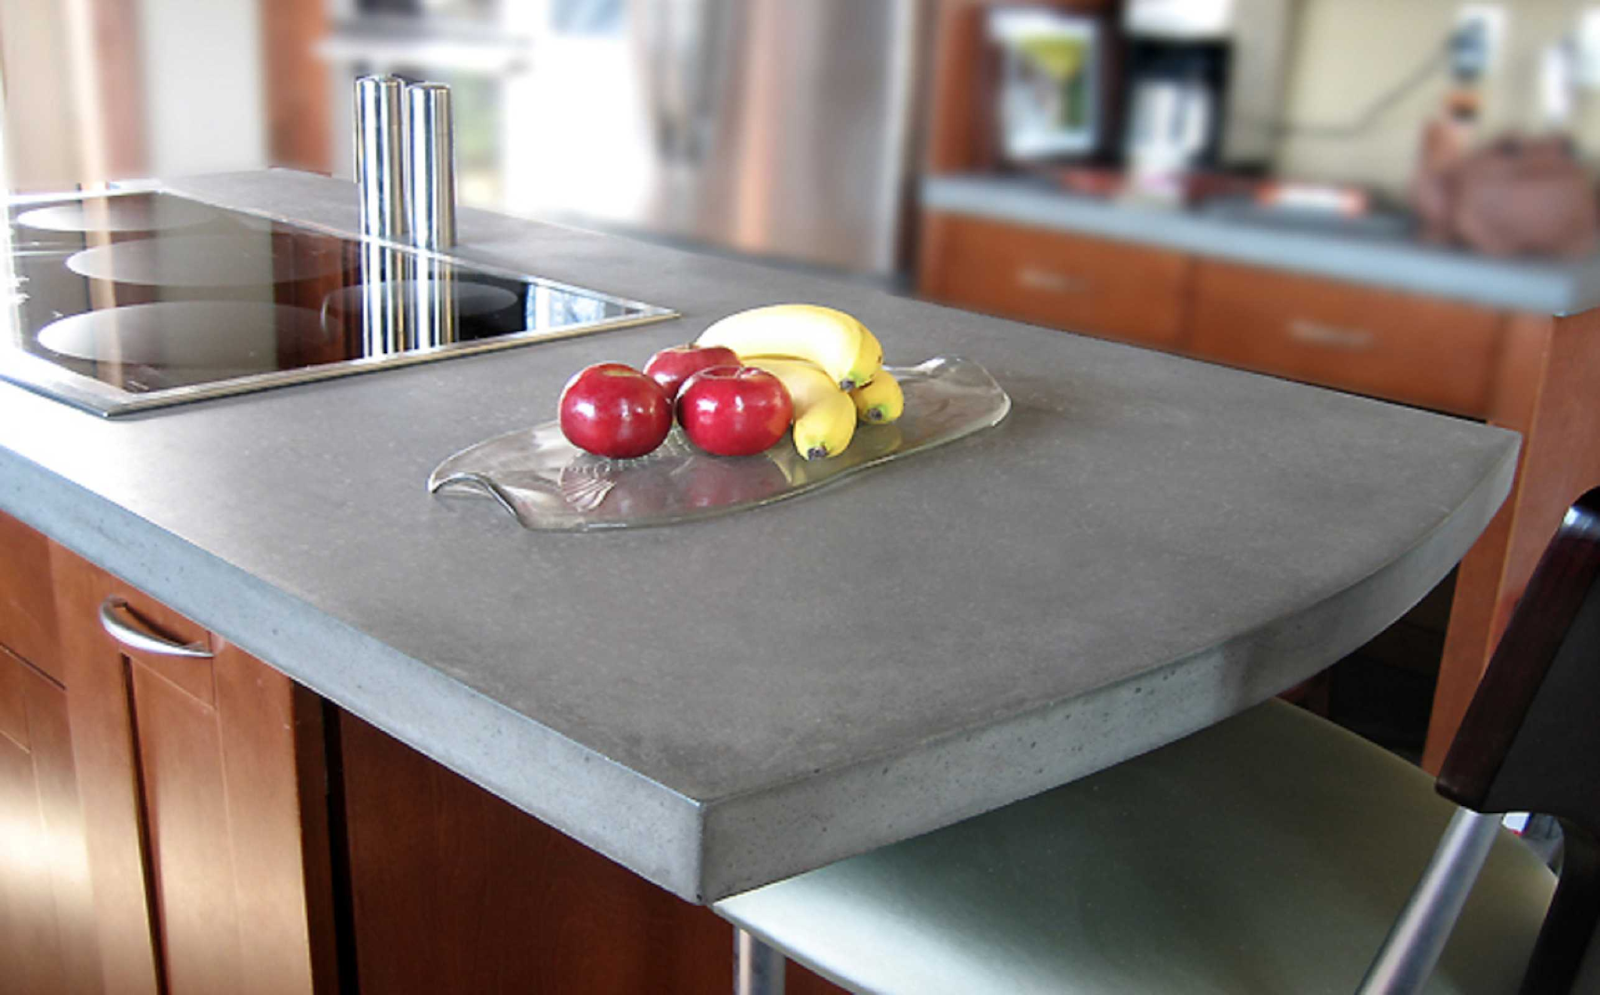 concrete countertop with apples and bananas on top